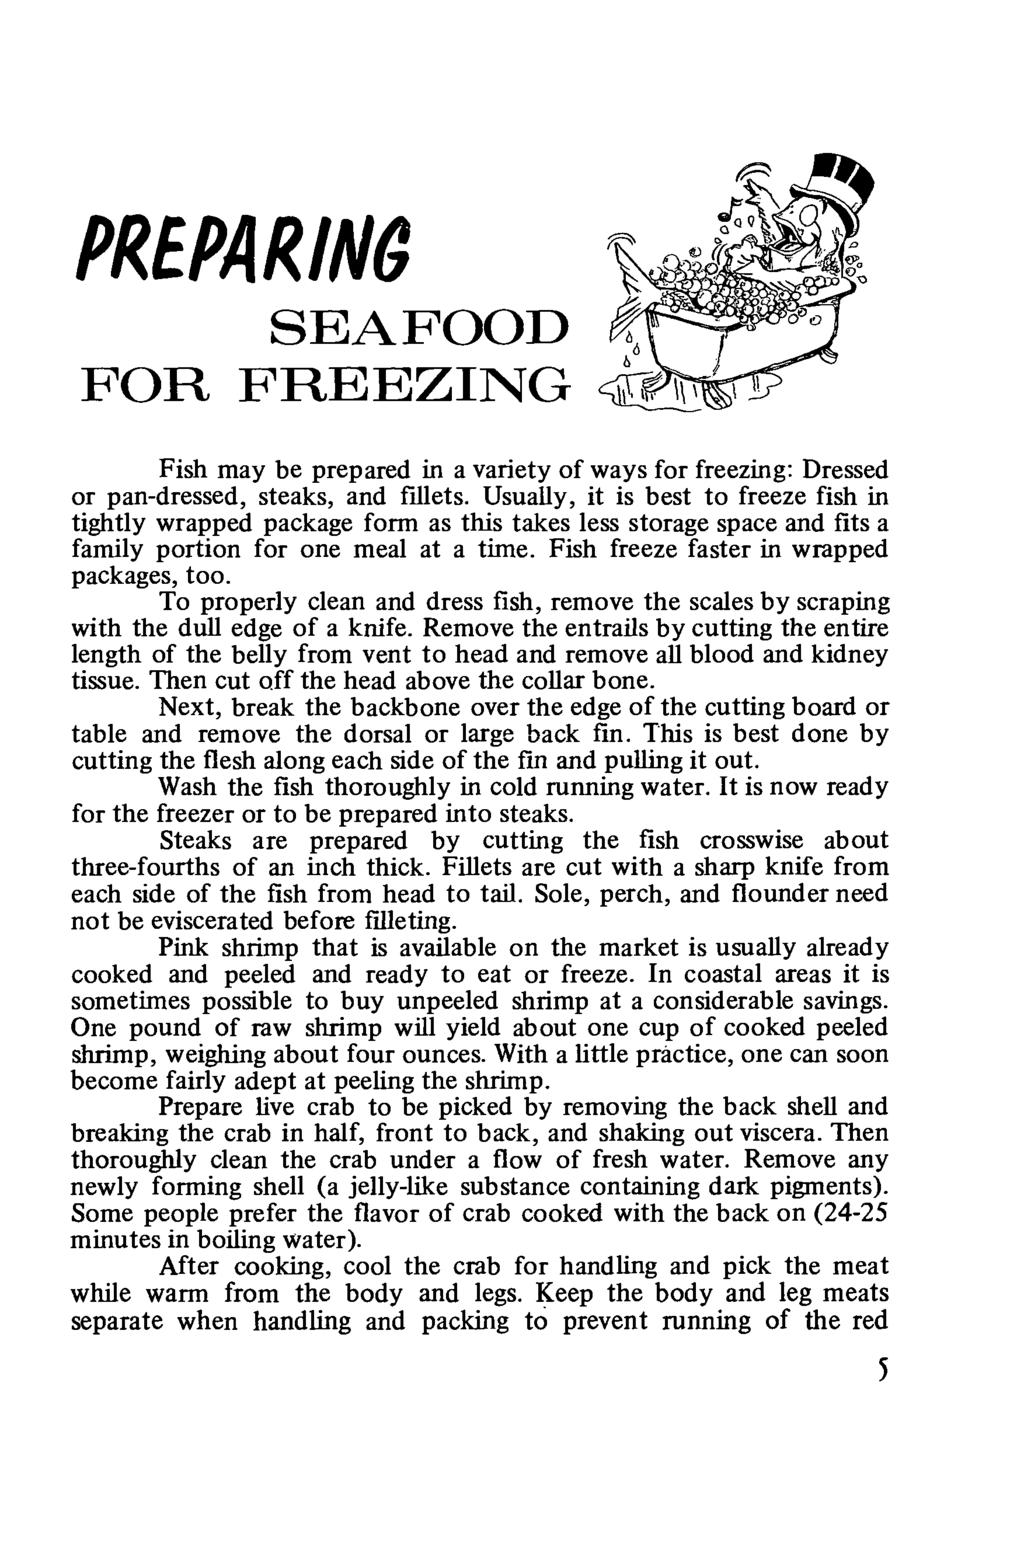 PRBPARm SEAFOOD FOR FREEZING Fish may be prepared in a variety of ways for freezing: Dressed or pan-dressed, steaks, and fillets.